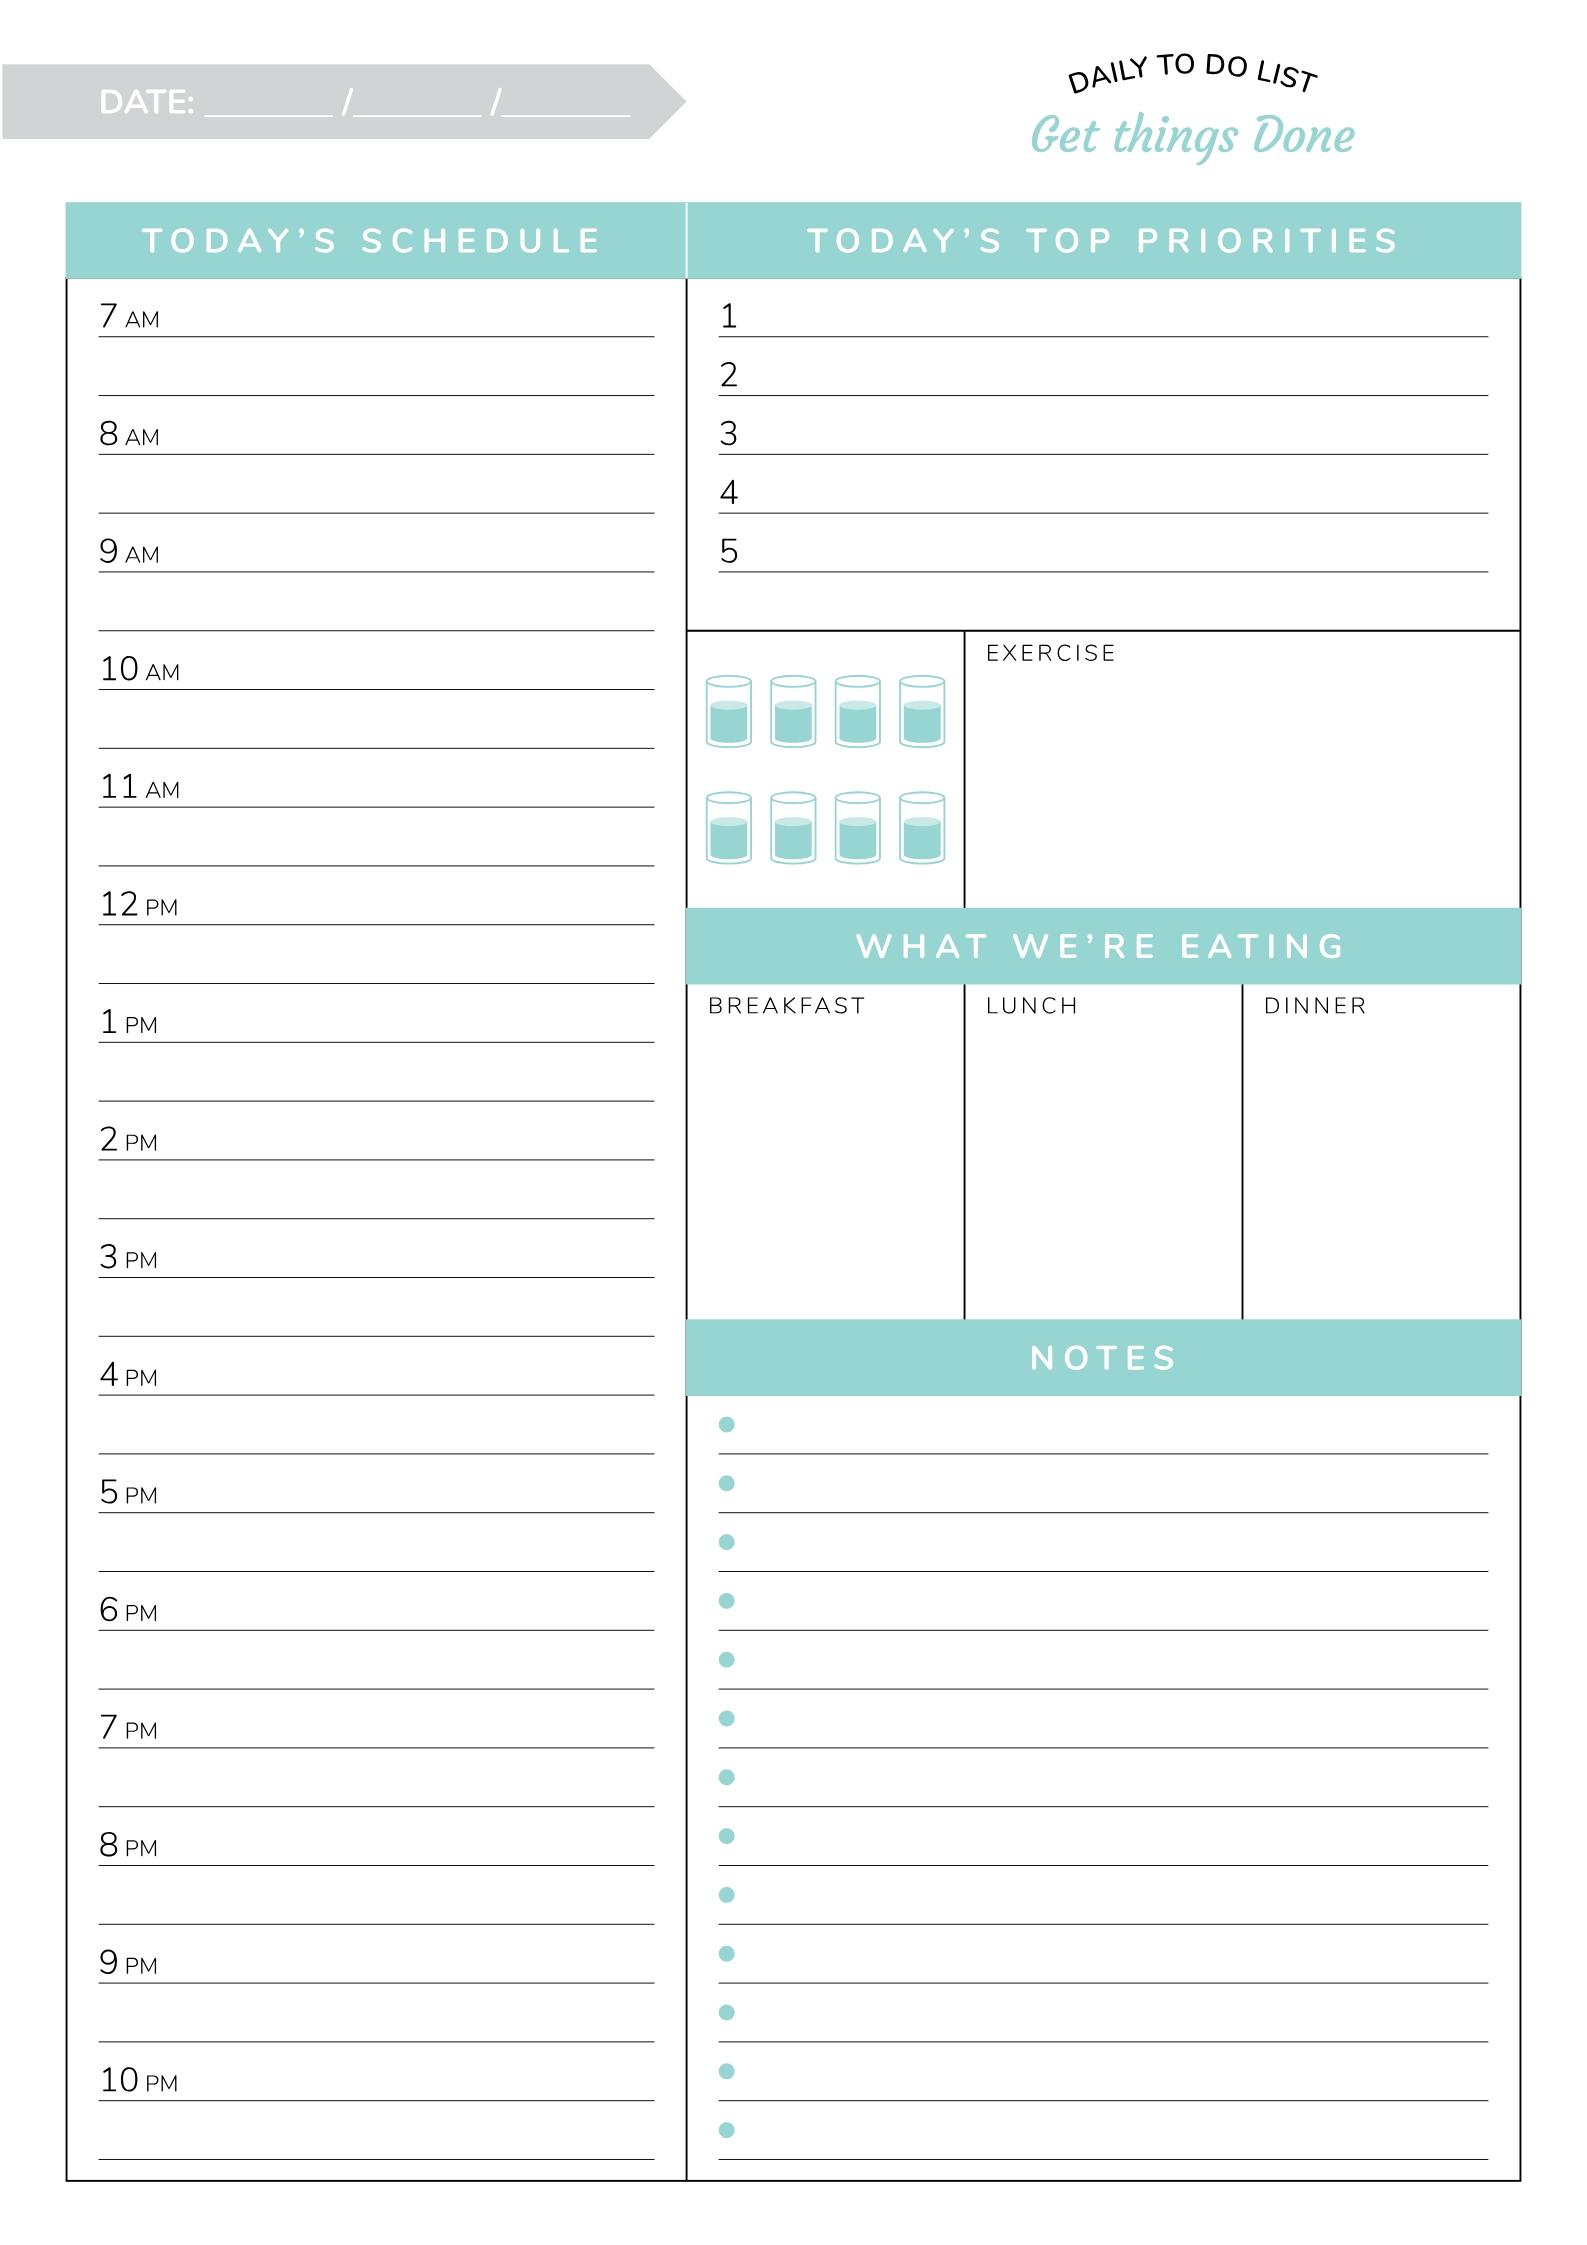 Daily Hourly Planner Template - Get Things Done | Hourly